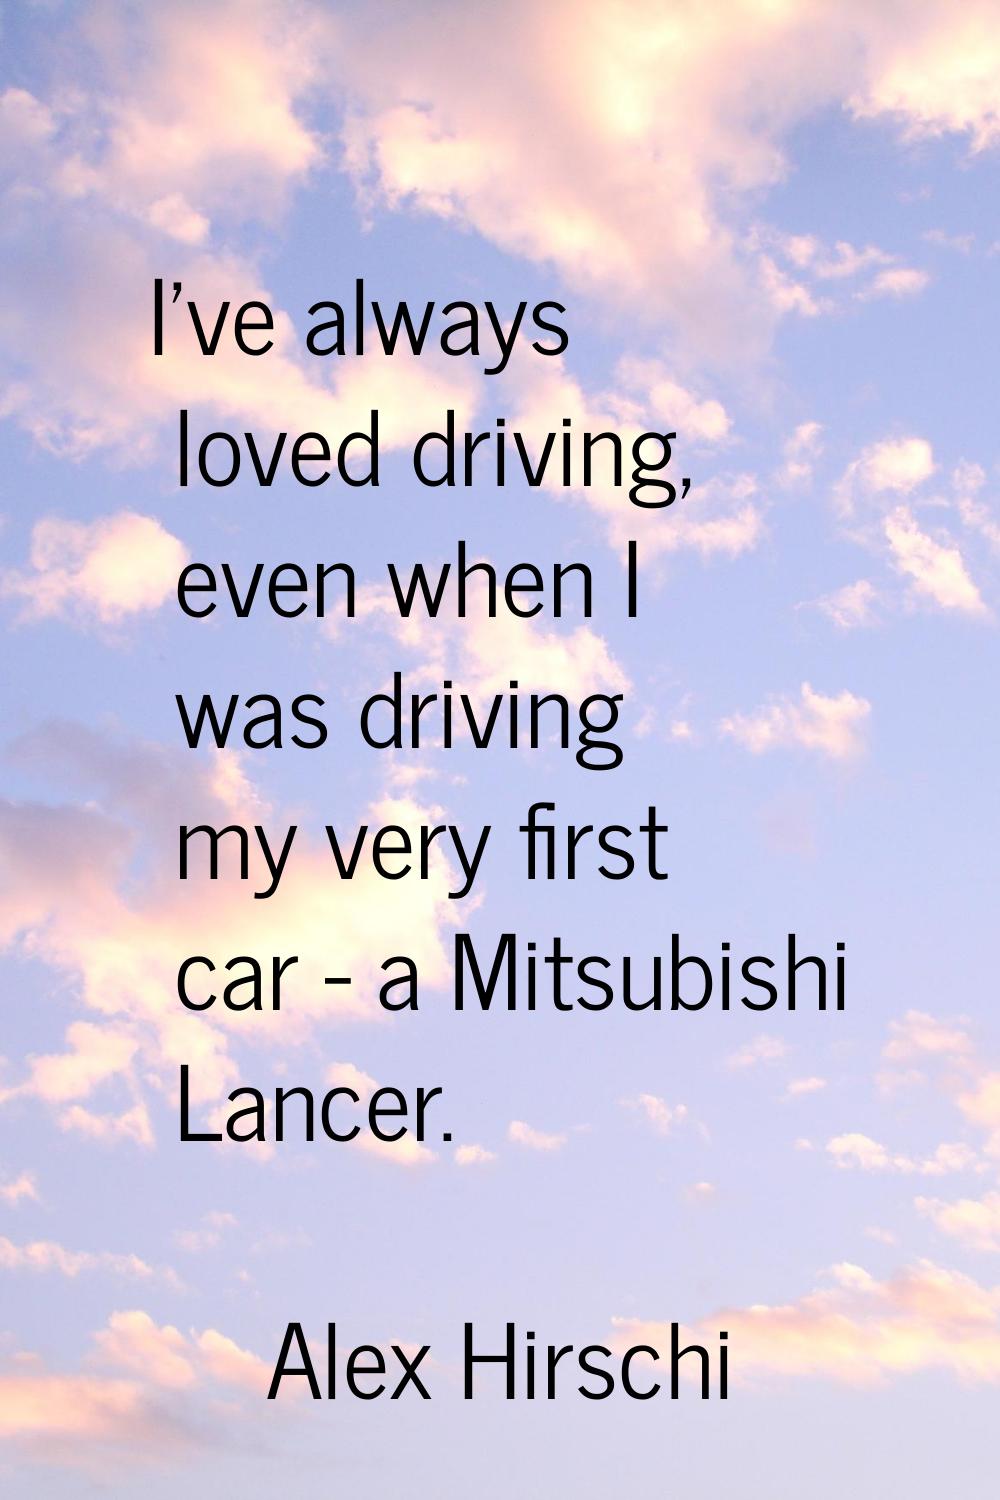 I've always loved driving, even when I was driving my very first car - a Mitsubishi Lancer.